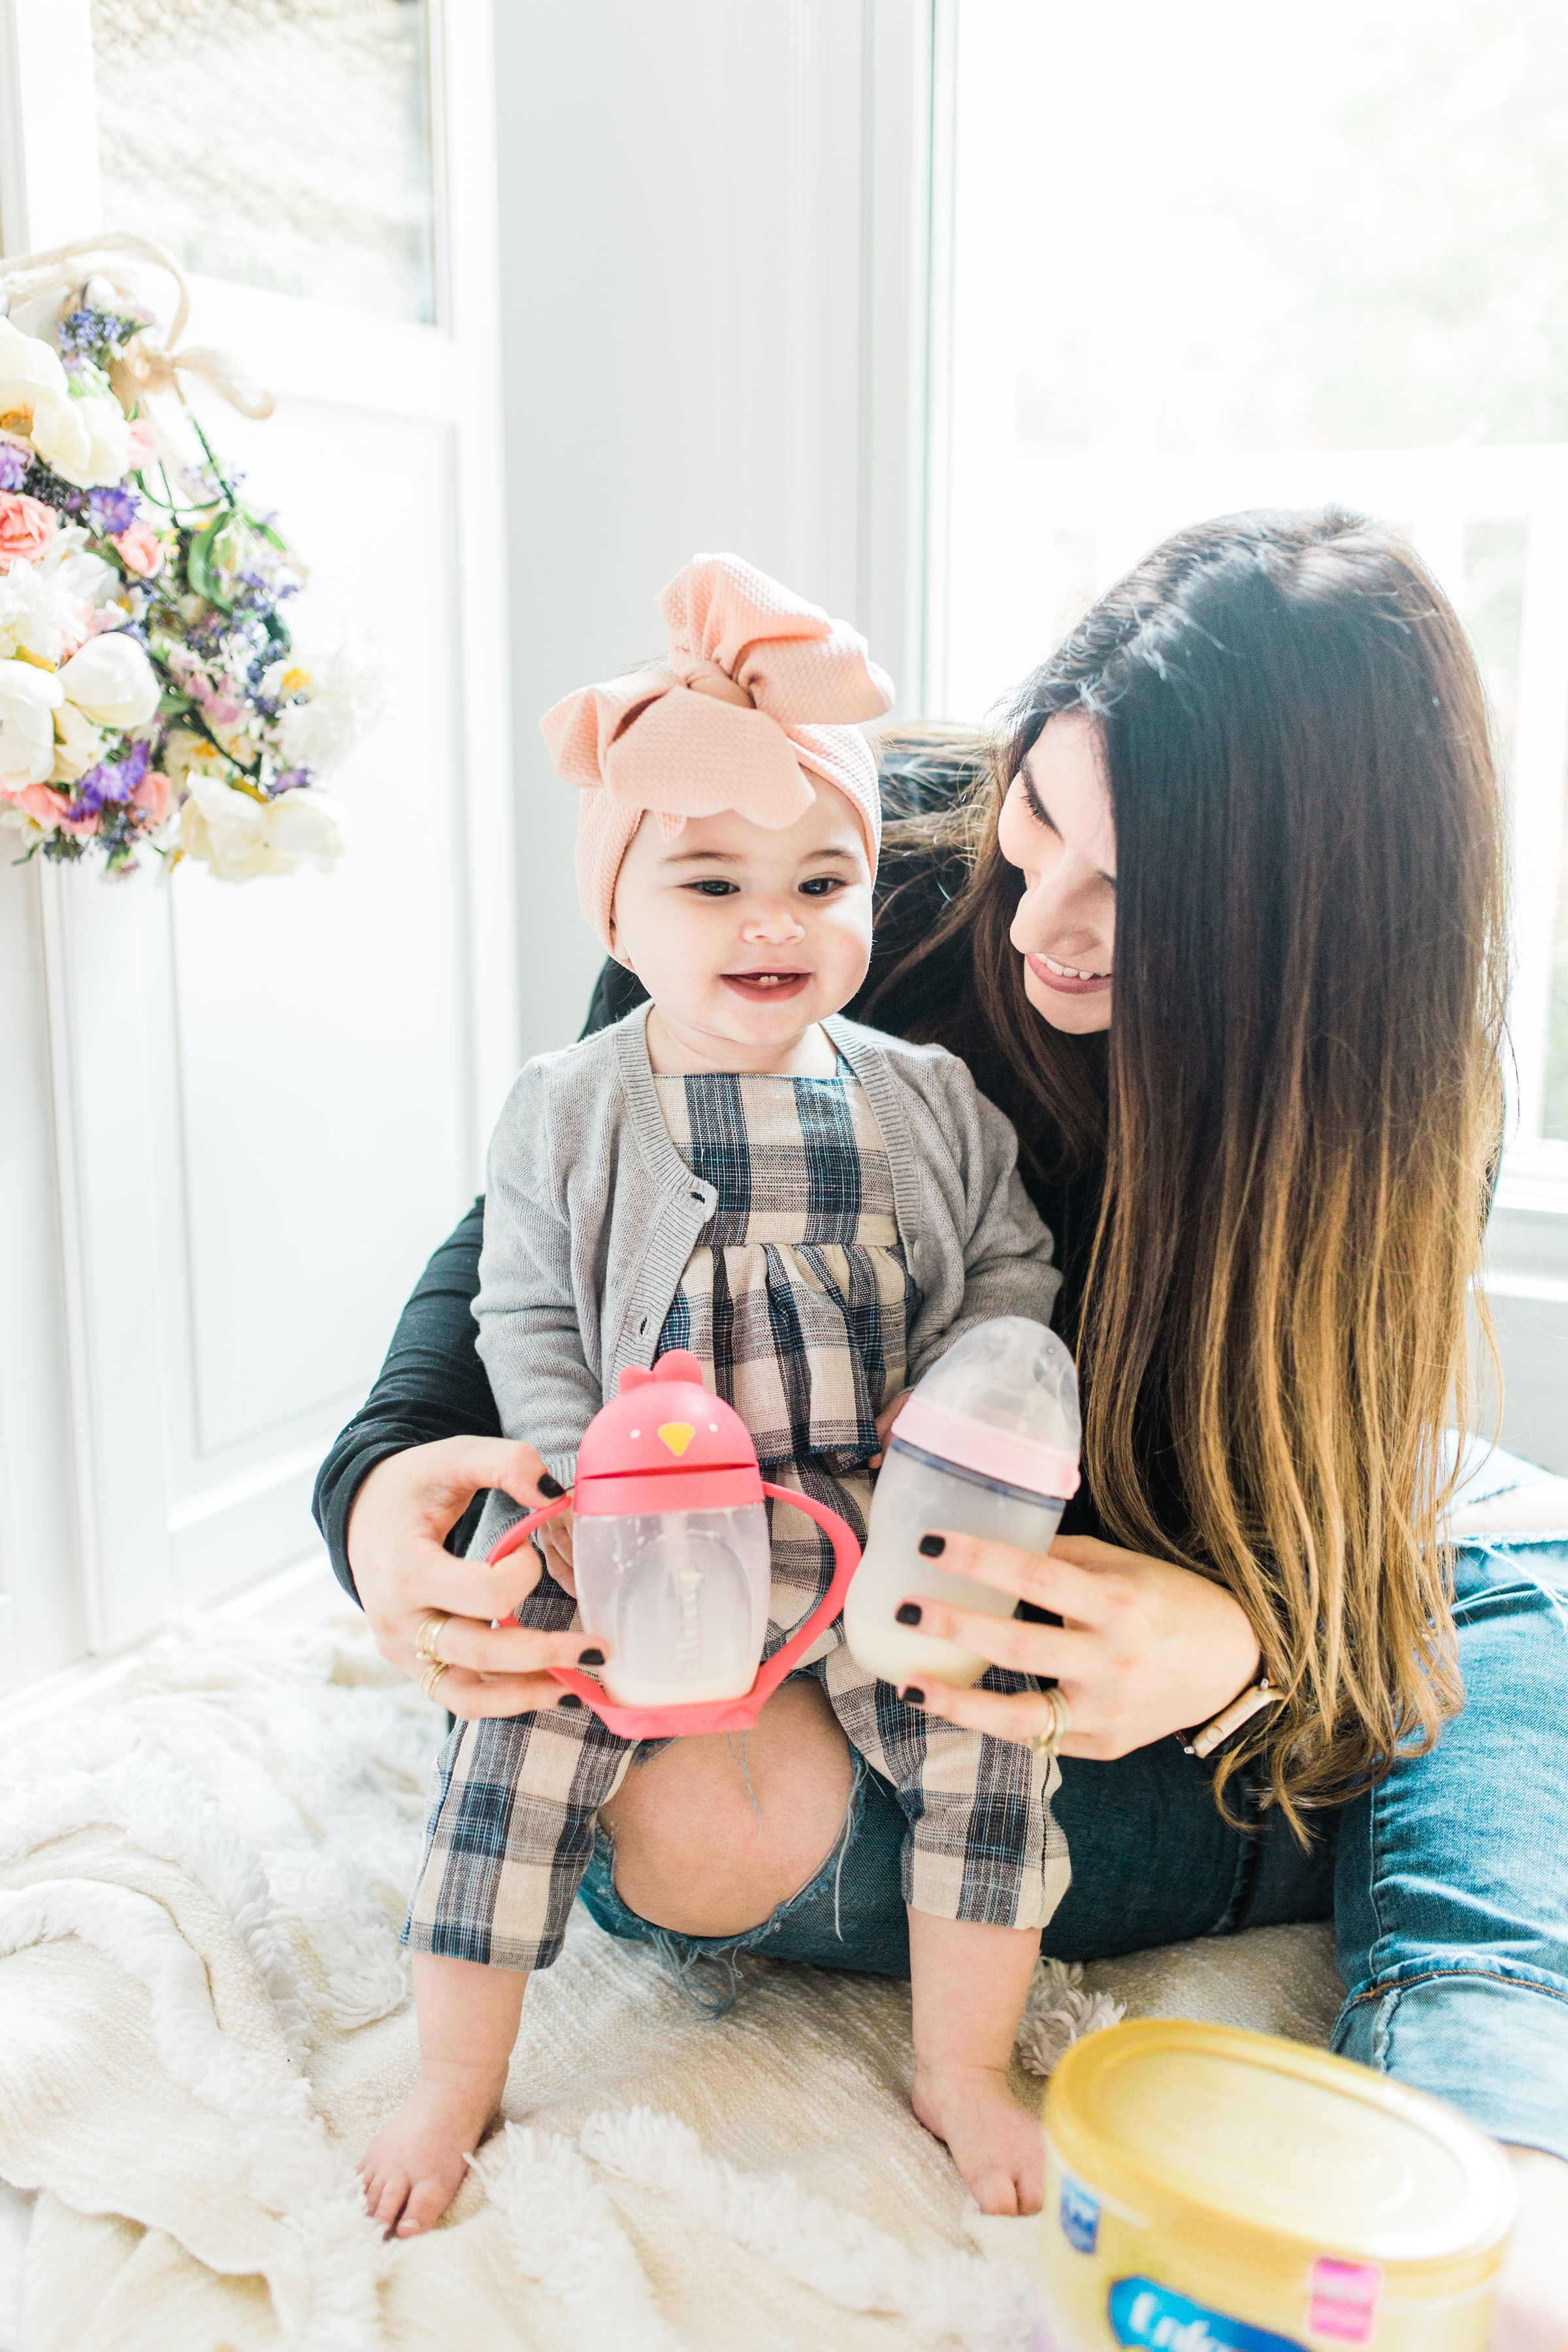 Transitioning your baby from a bottle to a sippy cup CAN be stress-free and fun; and we’re breaking down exactly how you can make the switch in just a few easy steps. You’ve got this, mama. Click through for the details. #baby #sippycup #bottle | glitterinc.com | @glitterinc